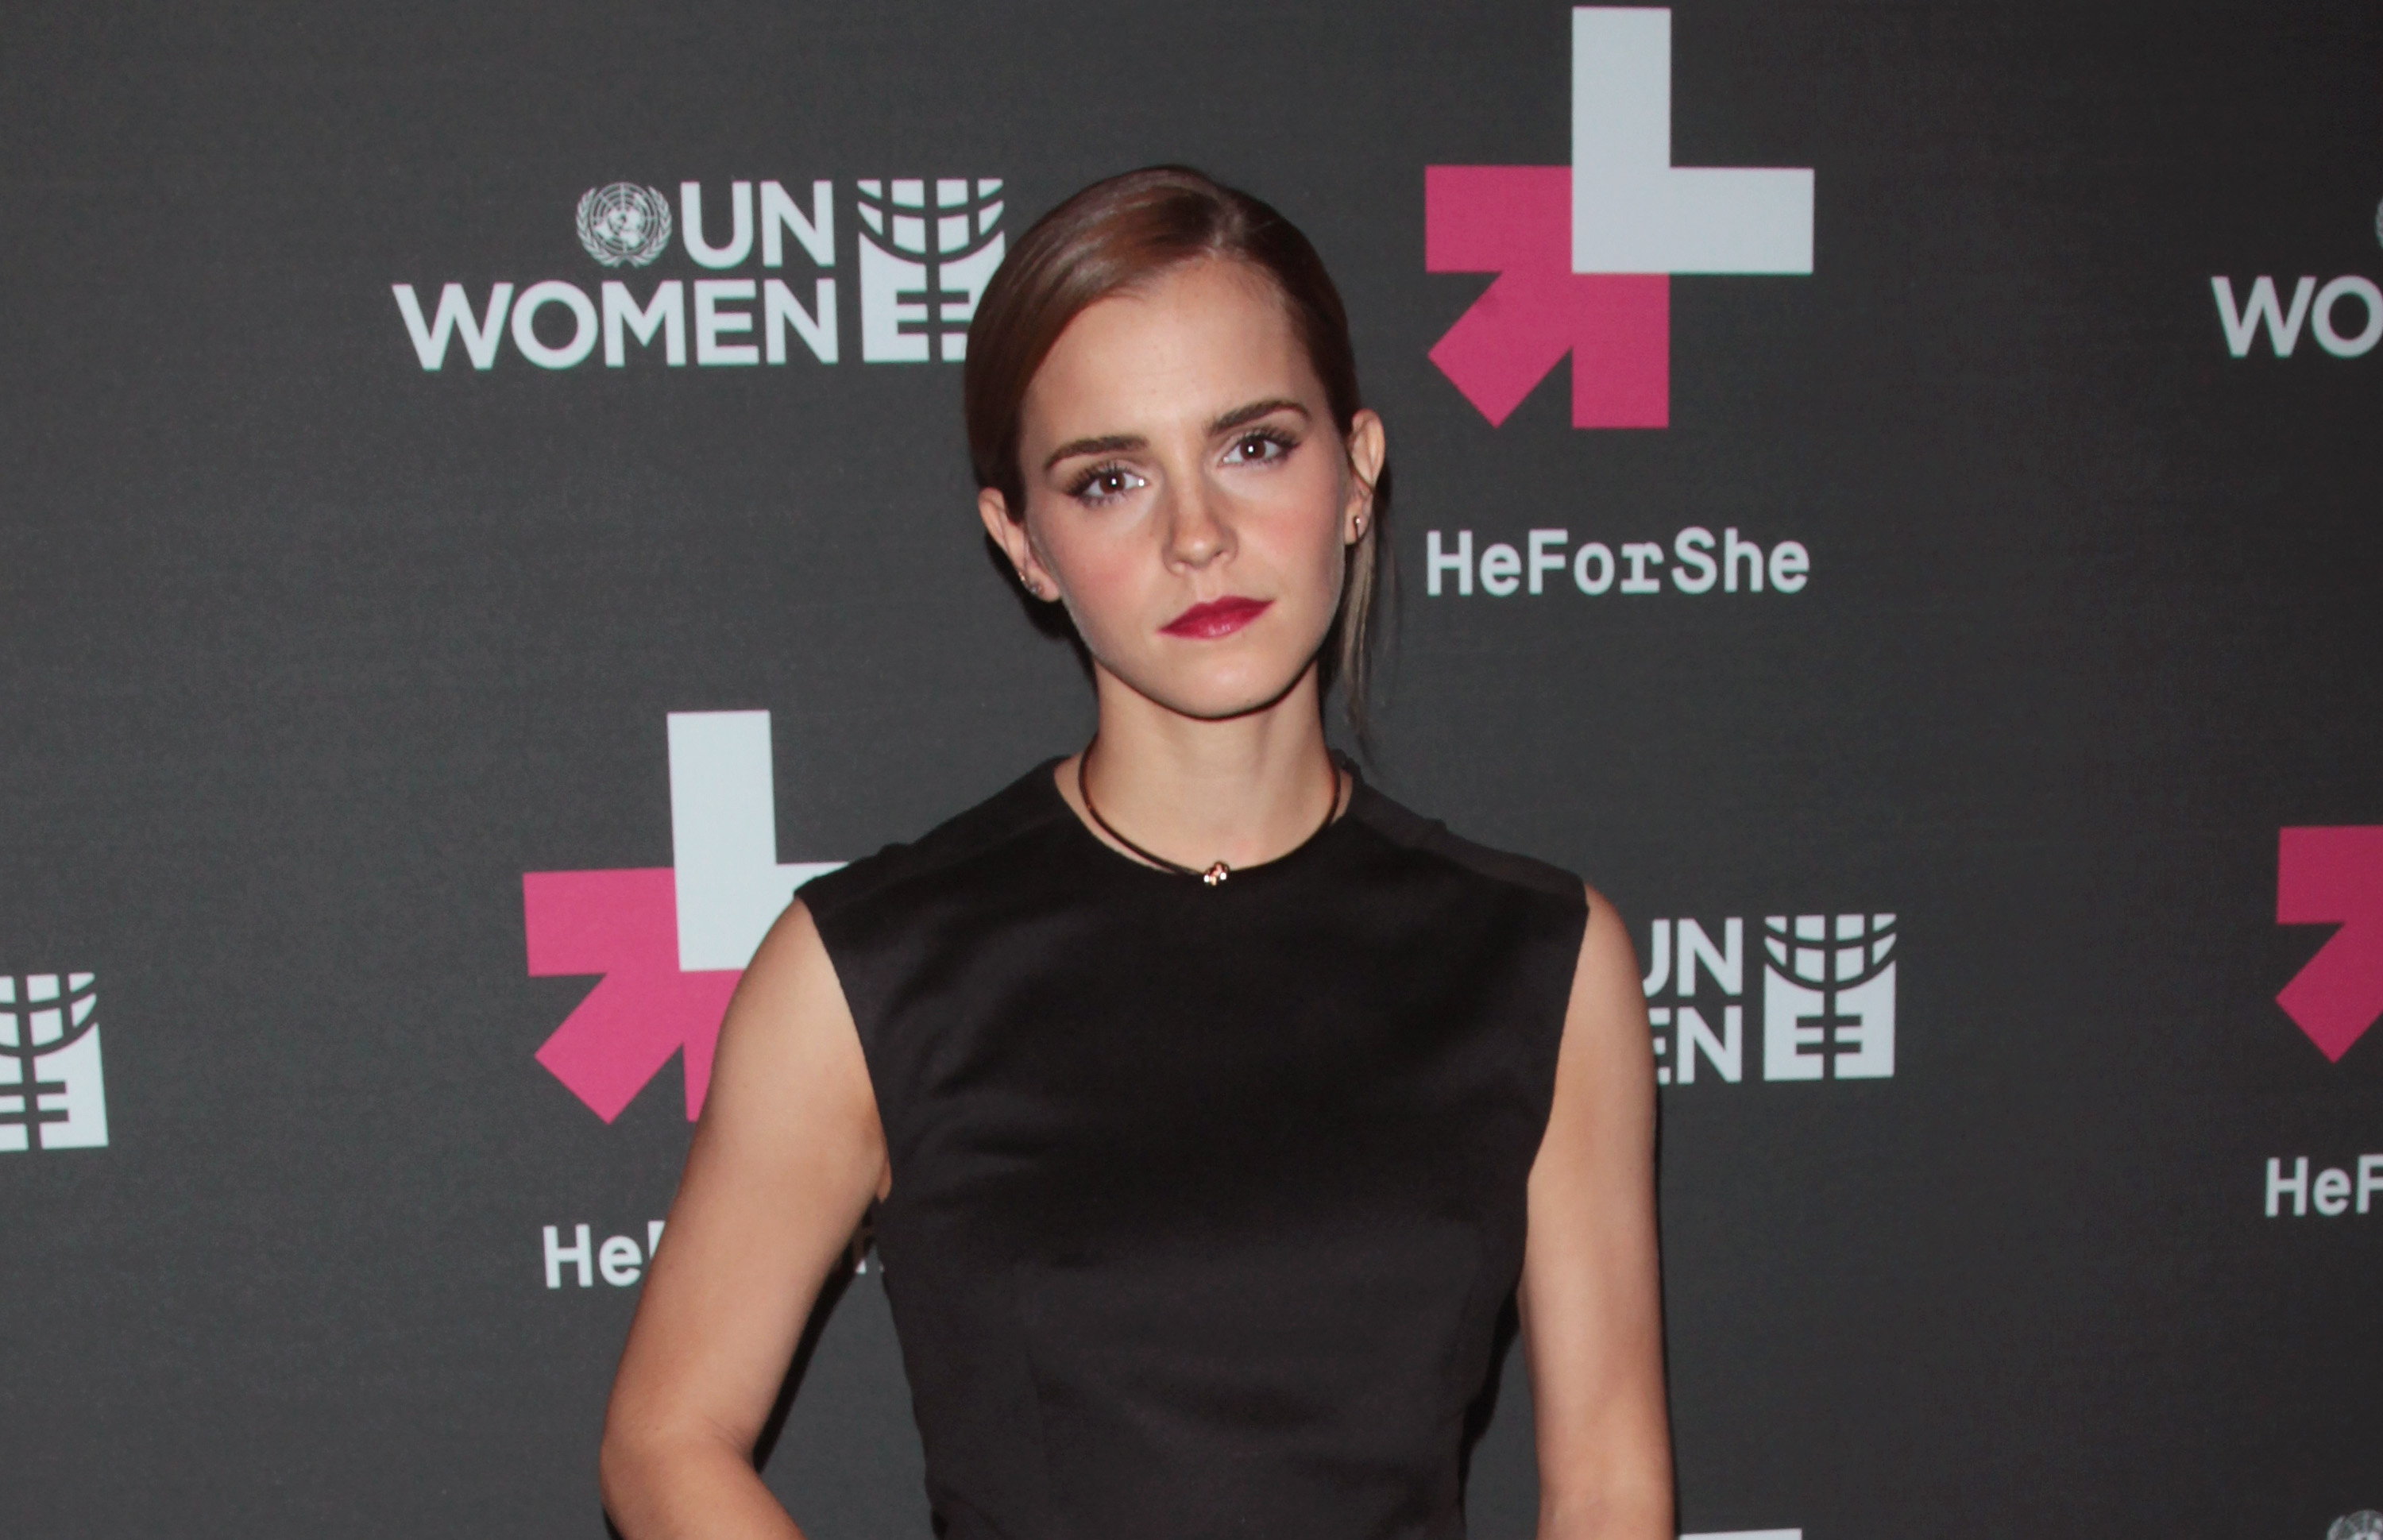 Actress Emma Watson attends the UN Women's "HeForShe" VIP After Party at The Peninsula Hotel on September 20, 2014 in New York City. (Jim Spellman&mdash;WireImage/Getty Images)